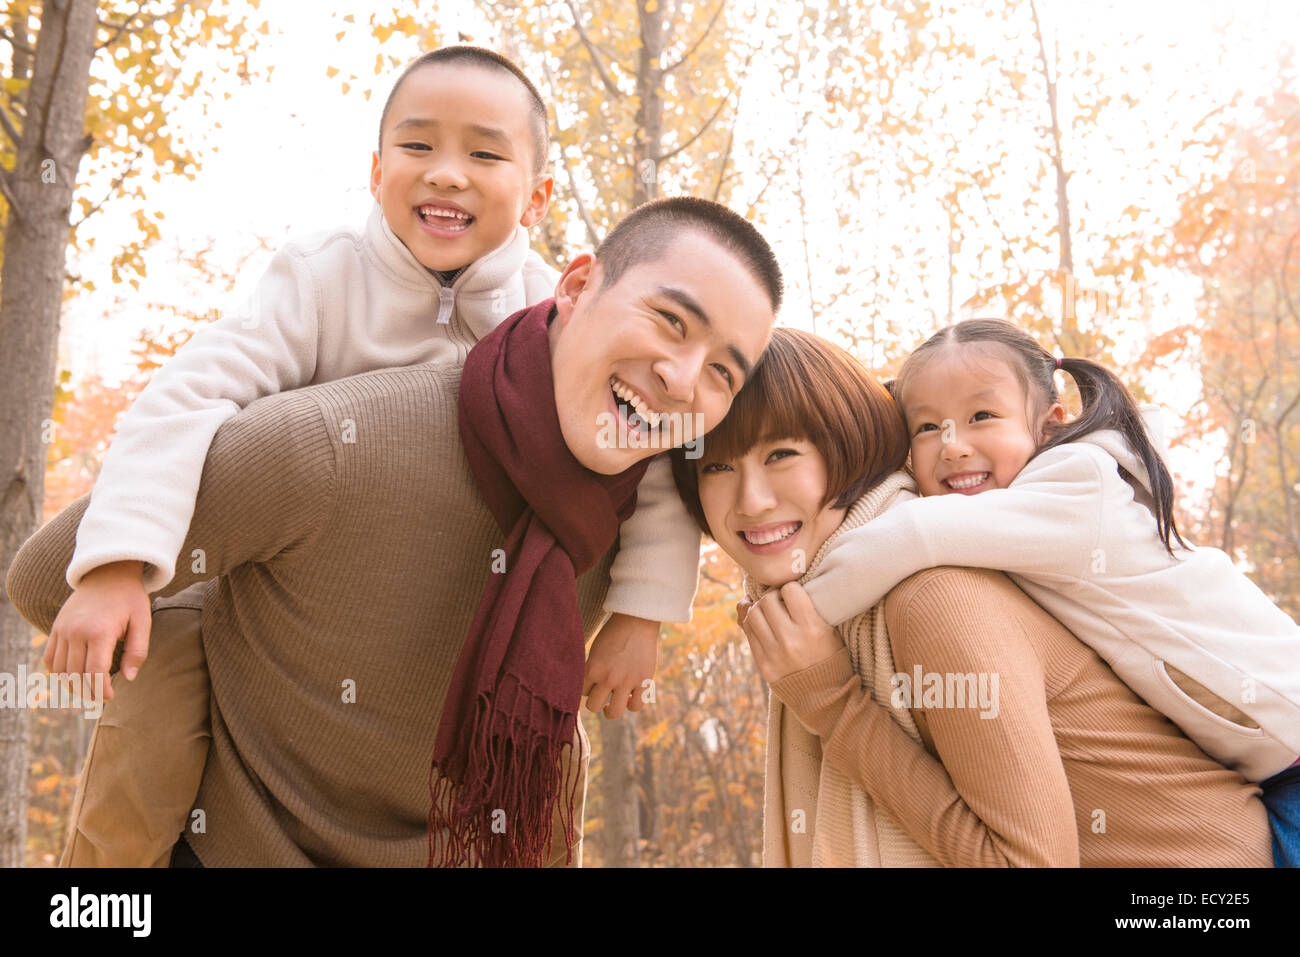 Family with two children at park Stock Photo